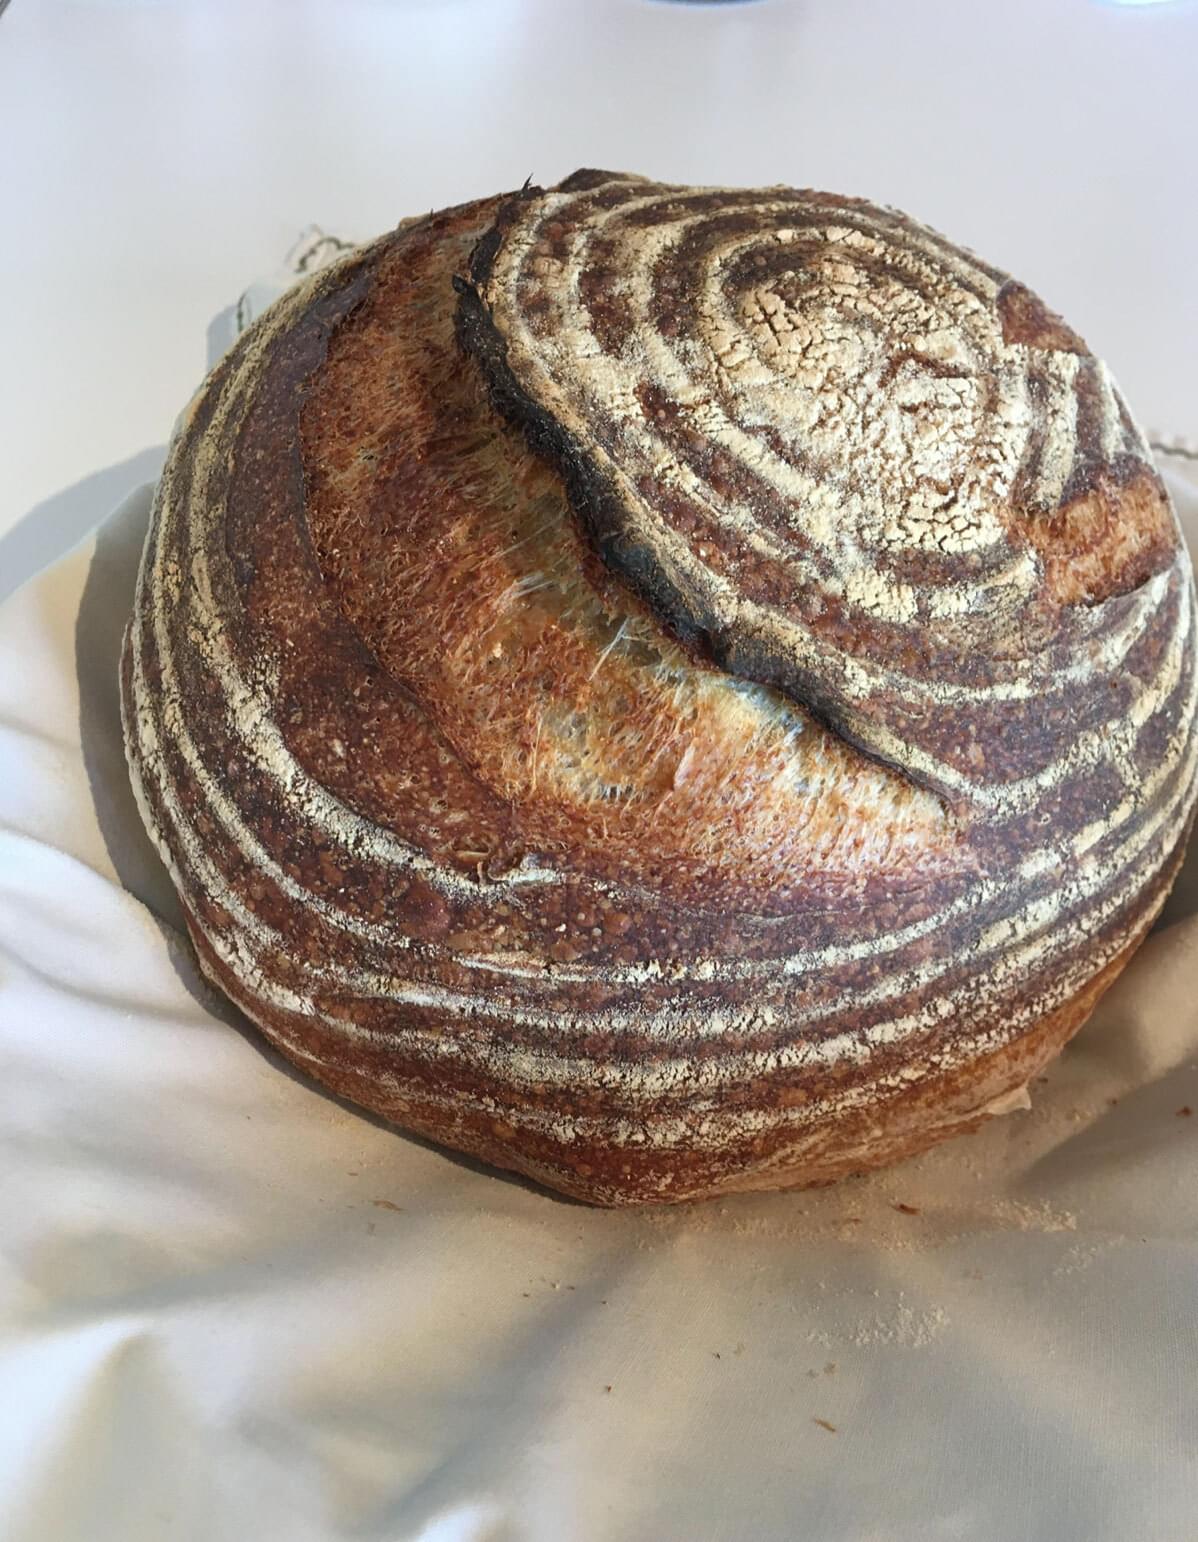 Baking Sourdough Bread in a Toaster Oven – Here's the Secret